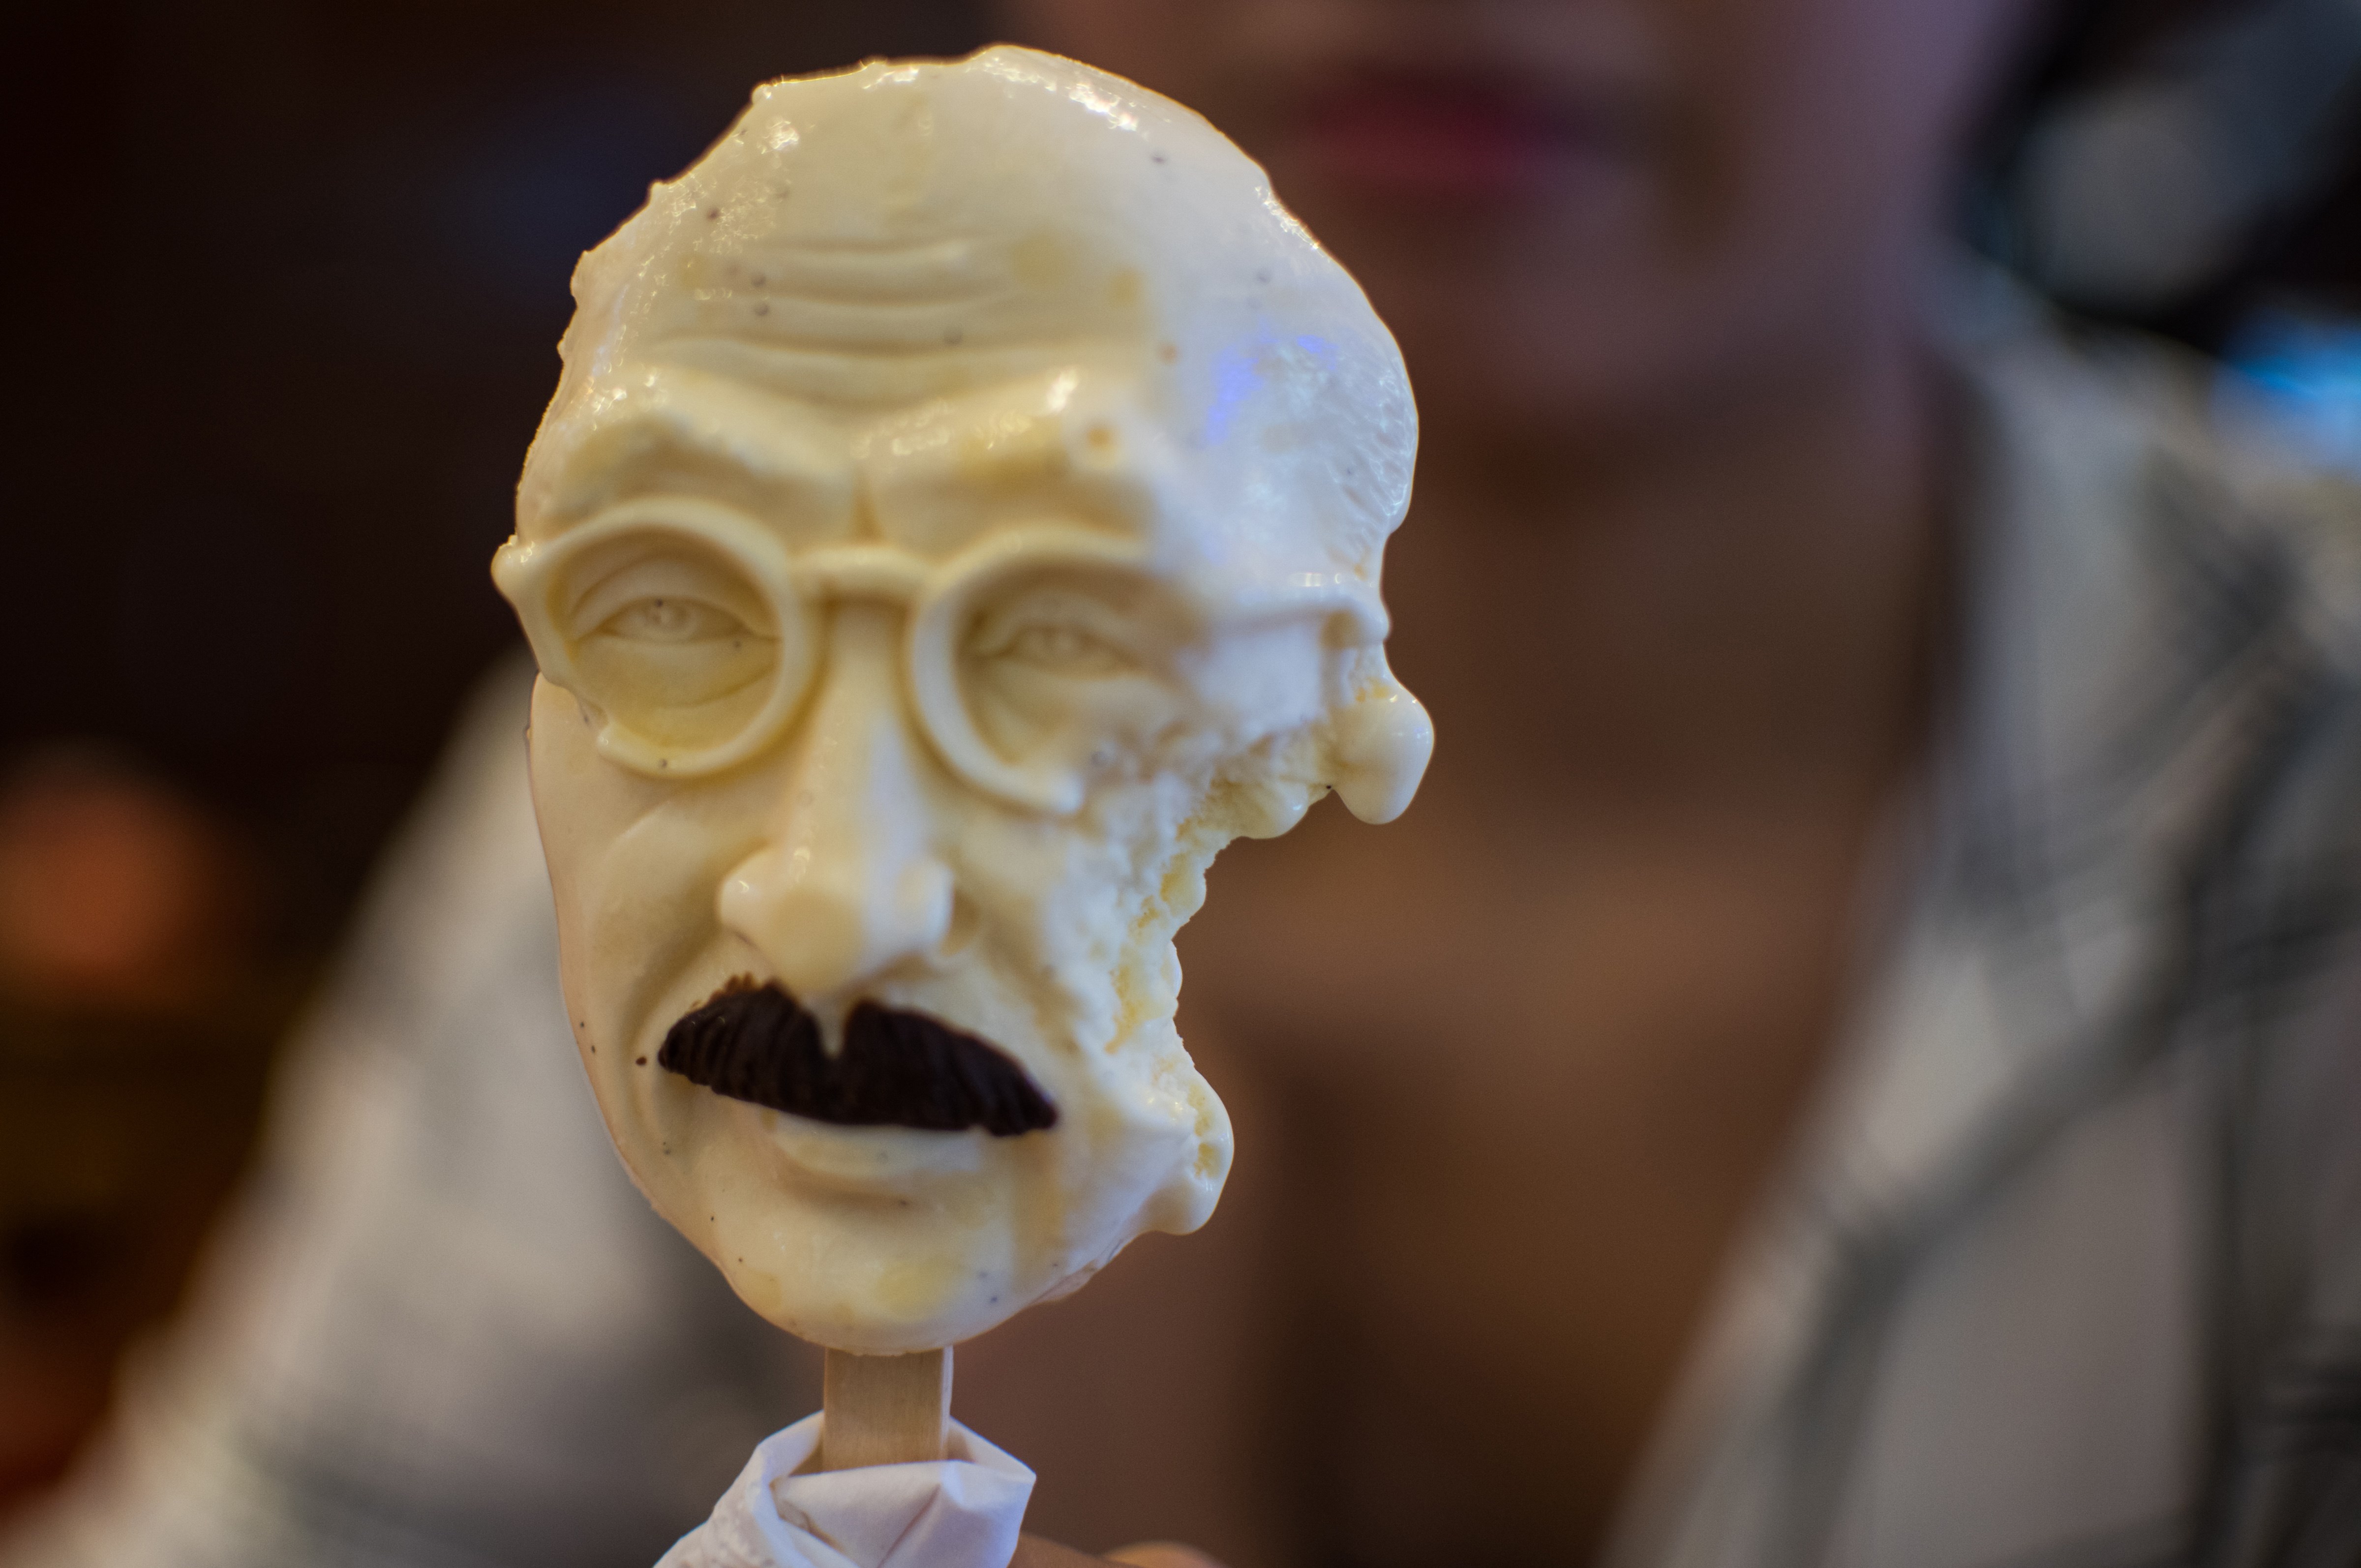 A woman sells an ice cream in the shape of executed Japanese war criminal Hideki Tojo at an ice cream store in Shanghai on September 2, 2015.